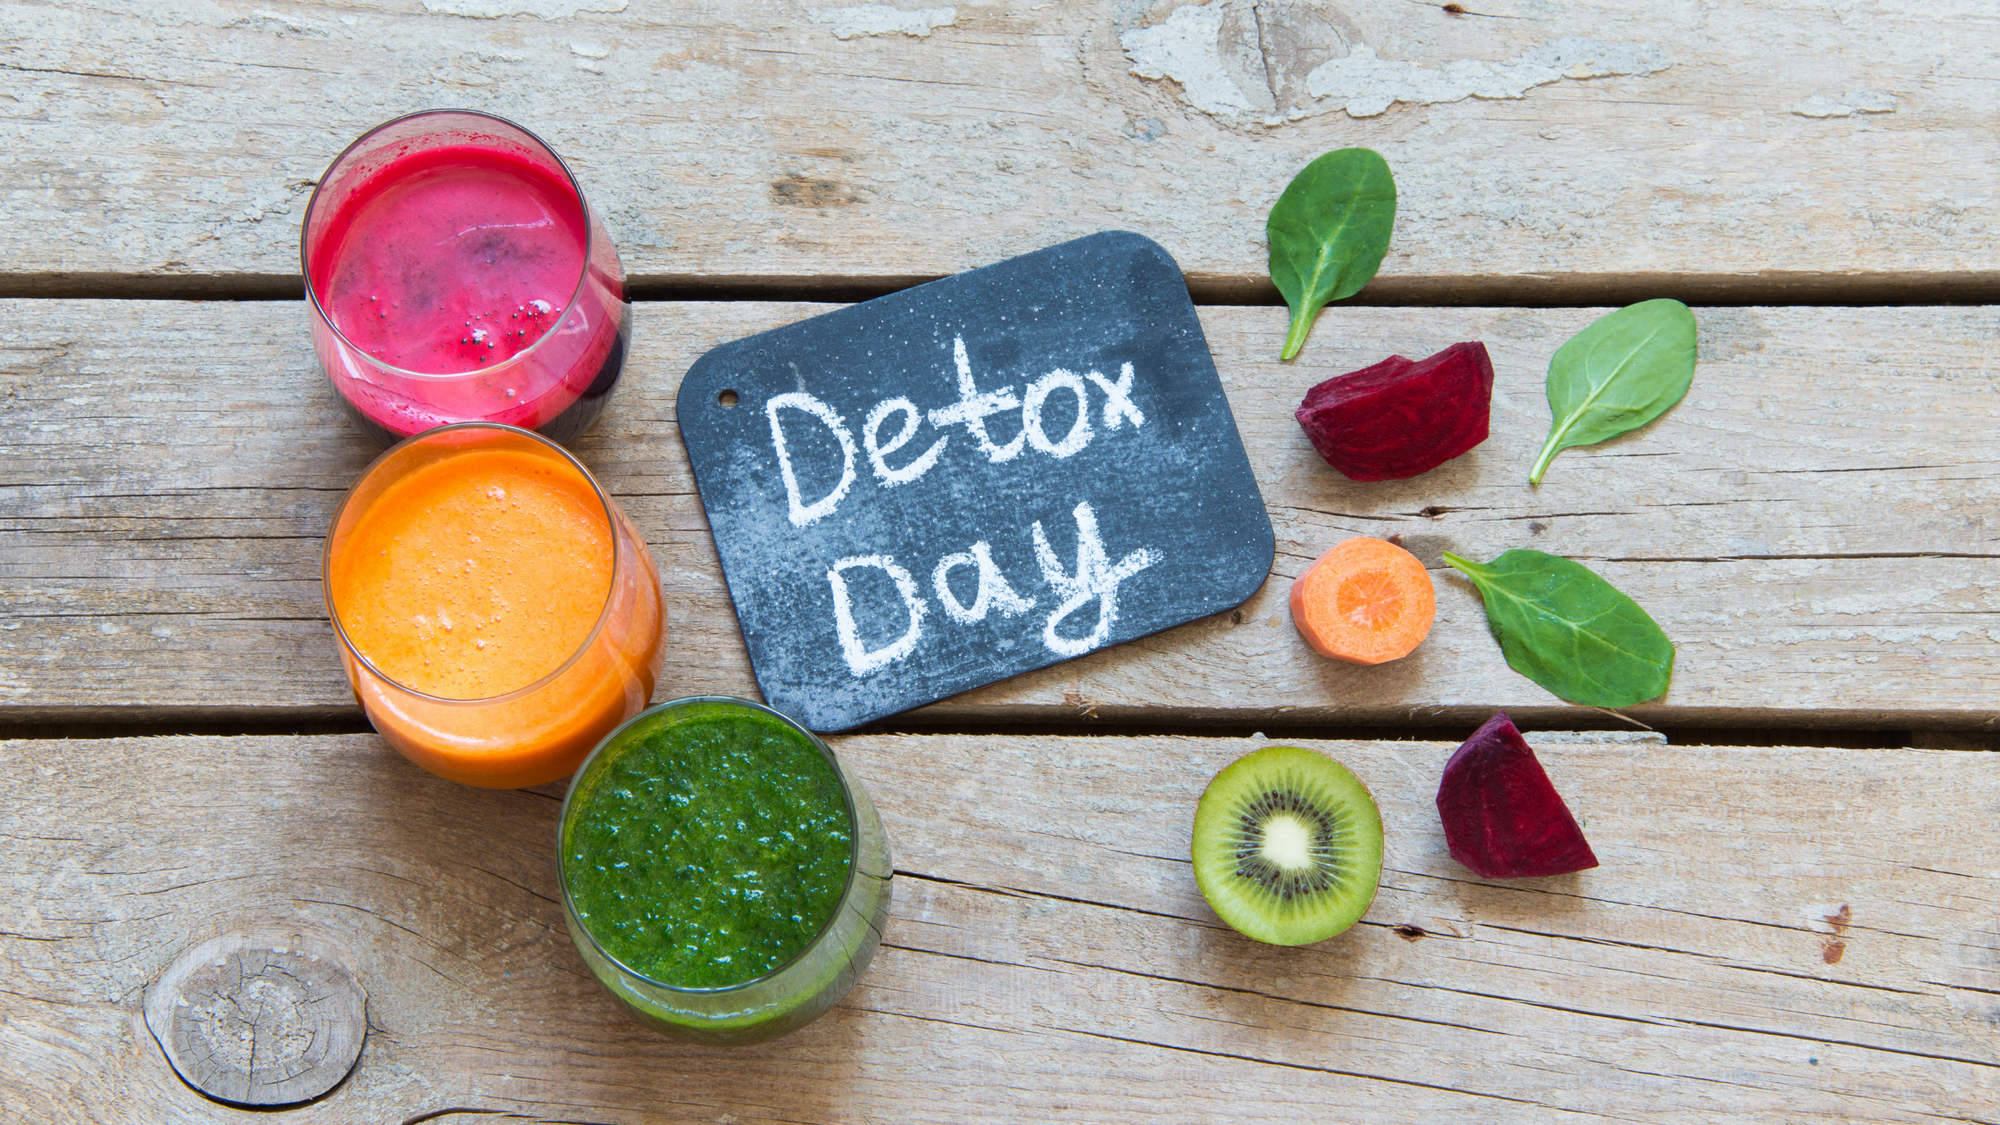 Juice Detox - The Best Way to Get Rid of All the Toxins in Your Body